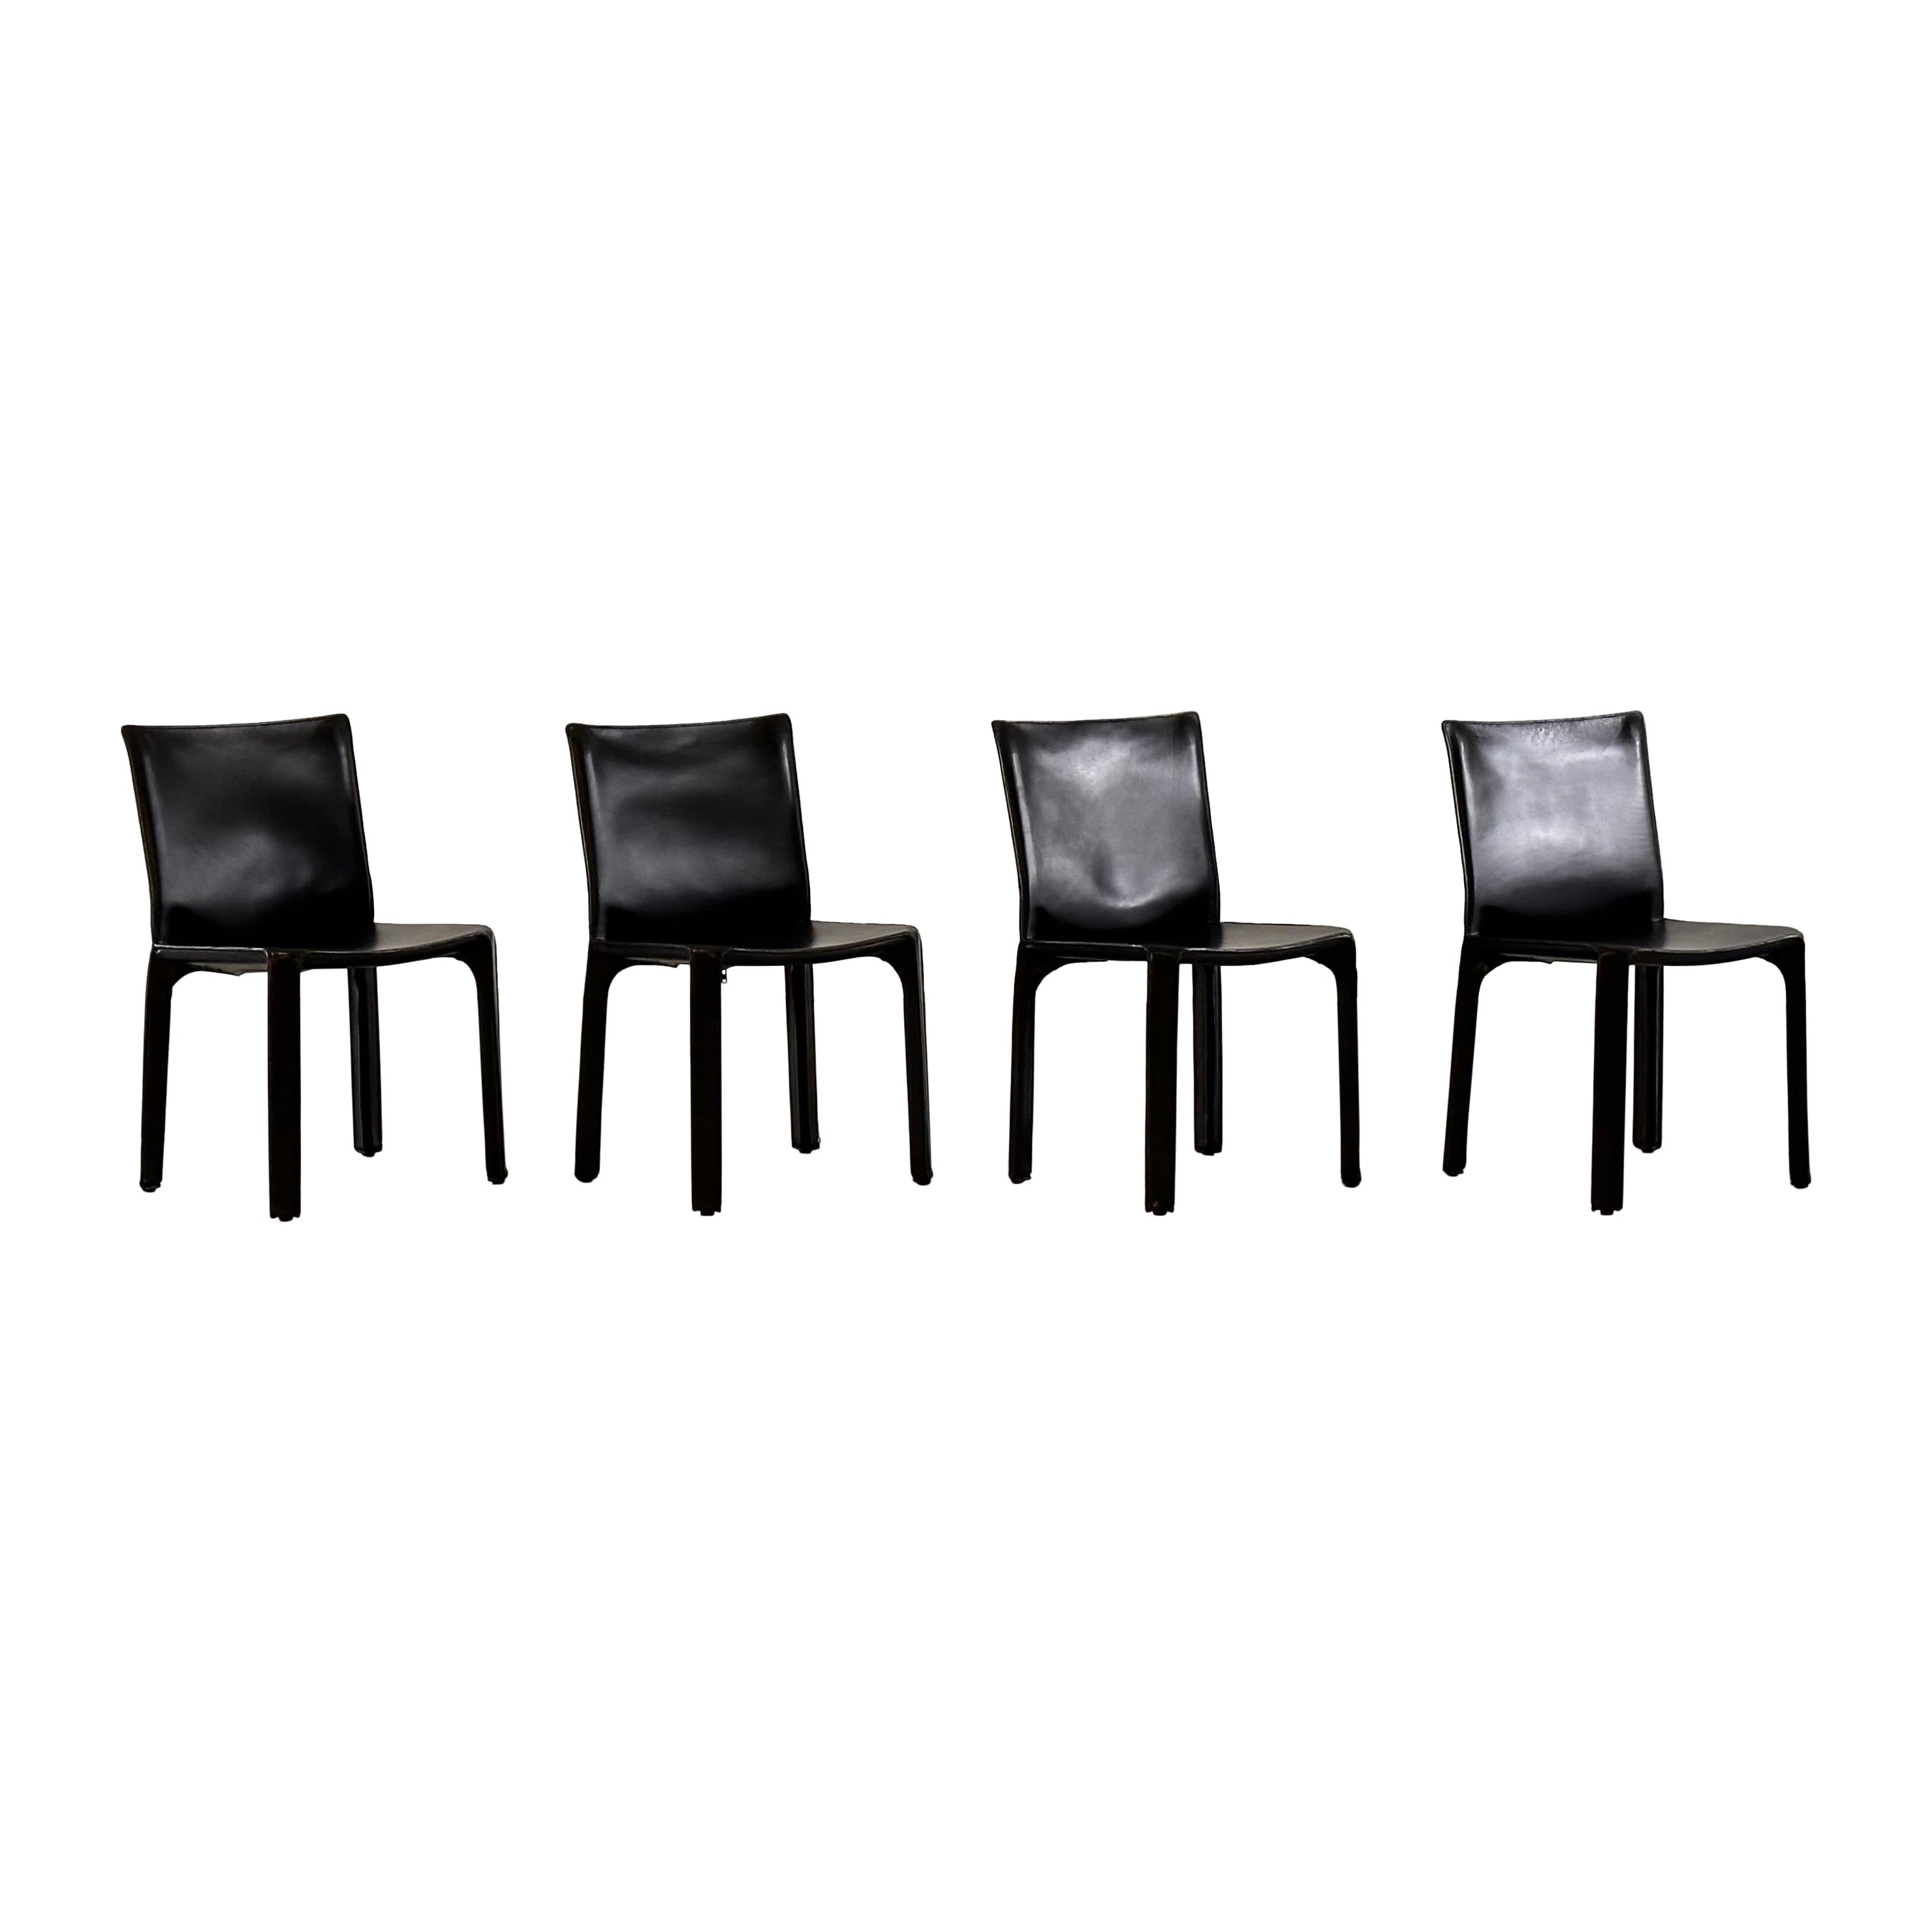 Set of Four CAB 412 Chairs by Mario Bellini for Cassina in Black Leather, 1970s For Sale